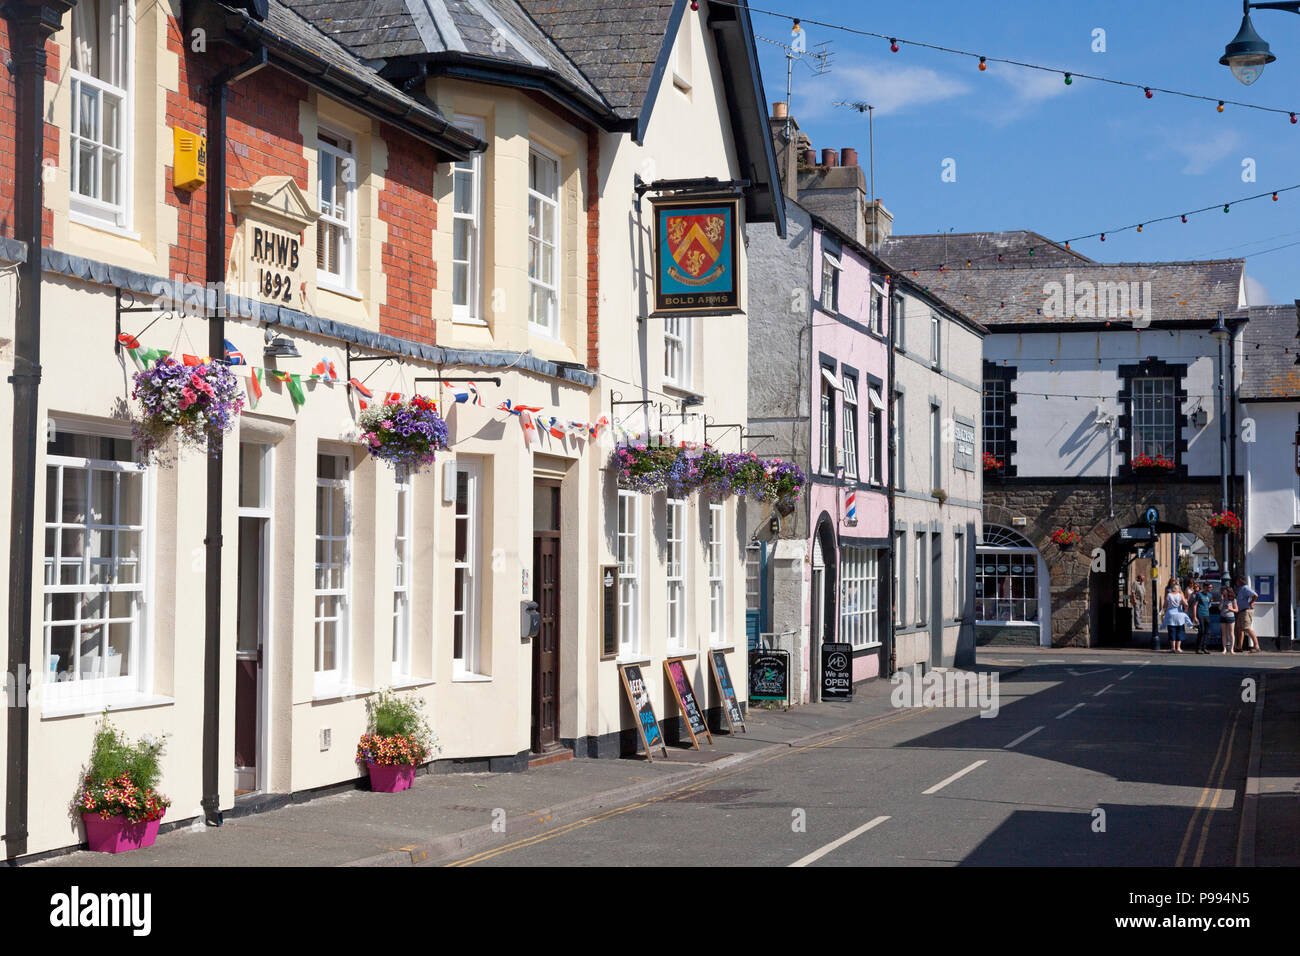 Der BOLD-Arms Hotel in der Church Street, Beaumaris, Anglesey, Wales Stockfoto